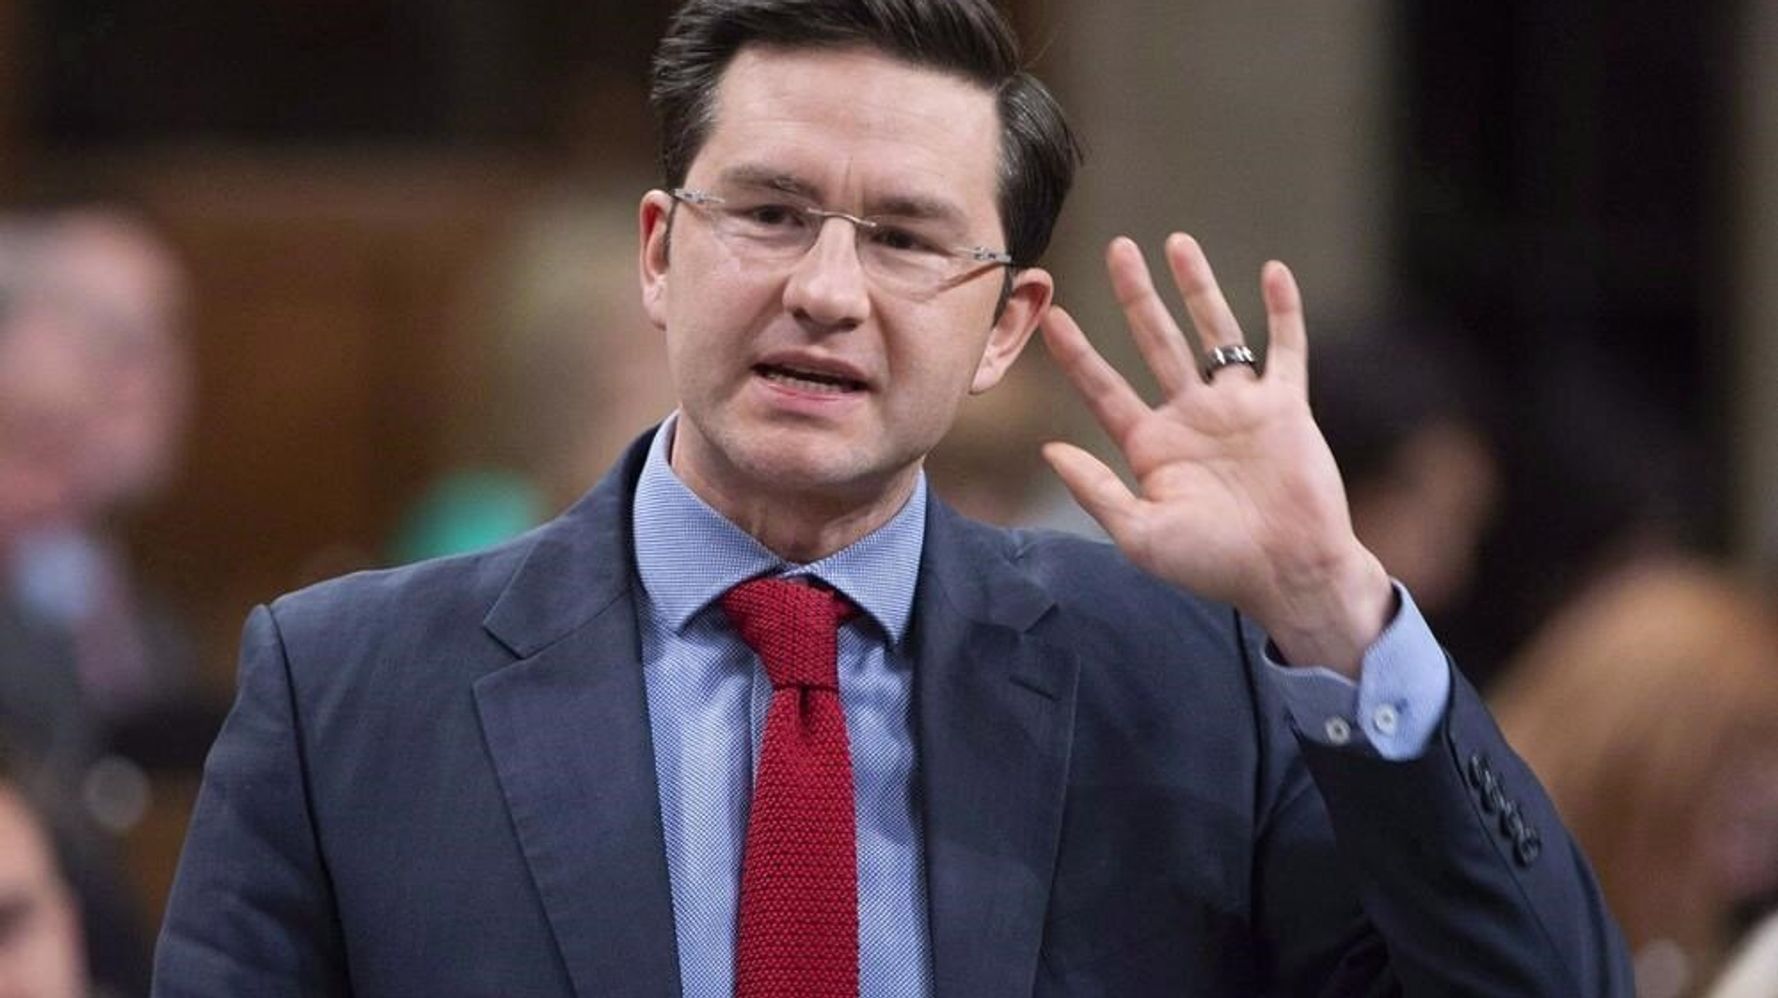 Pierre Poilievre Ready To Take On Liberals In Nasty 2019 Campaign